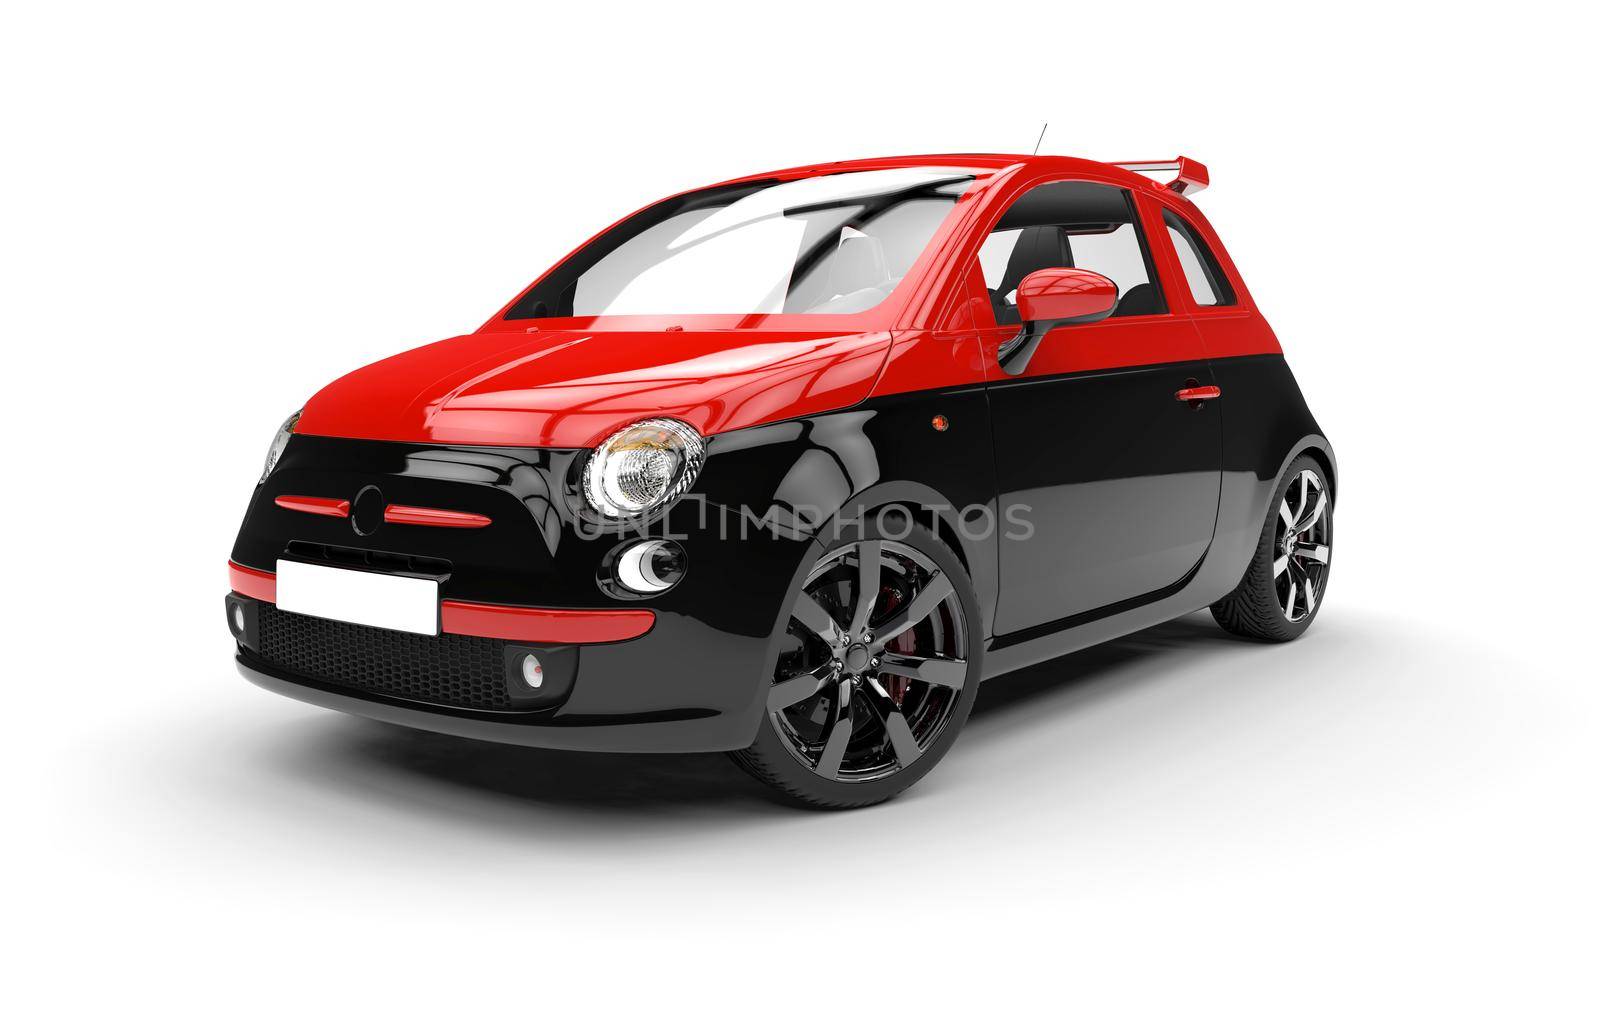 Front of a generic red and black city car by cla78